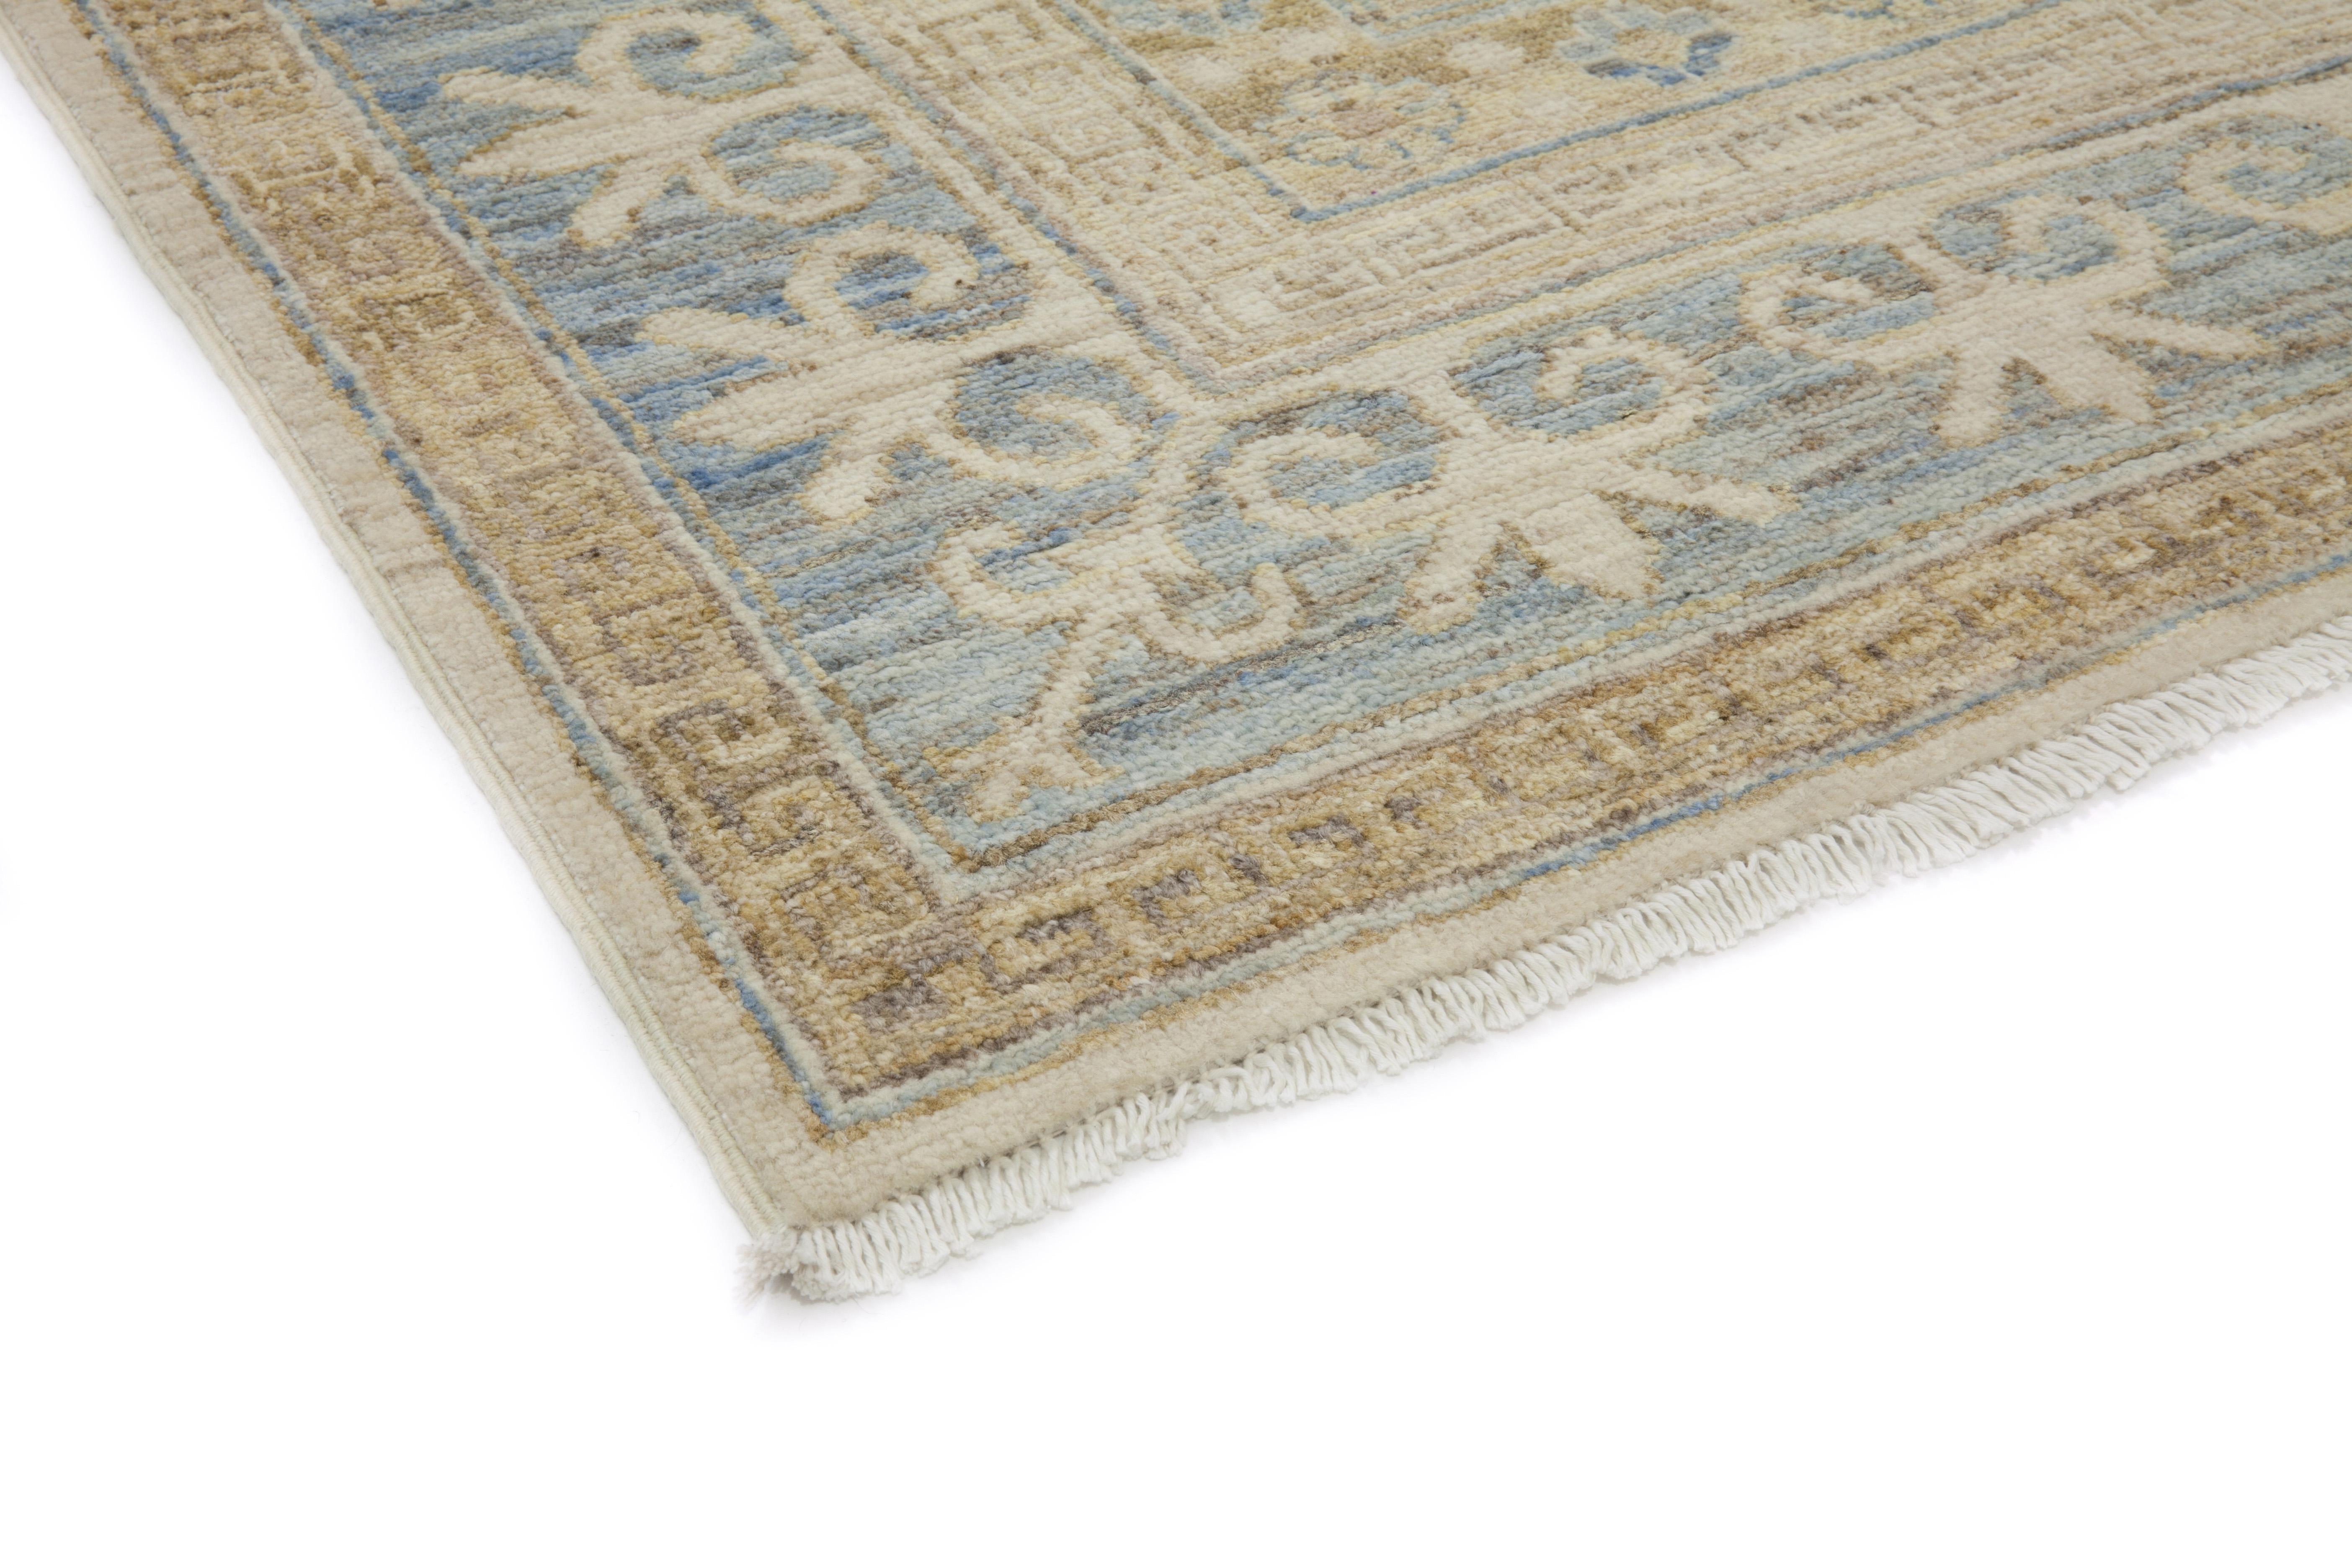 Color: Beige - Made In: Pakistan. 100% Wool. The city of Khotan was a key trading post along the Silk Road, and the rugs woven there for centuries incorporated Chinese, Persian, and Western influences. Hand-knotted of soft, durable wool, this